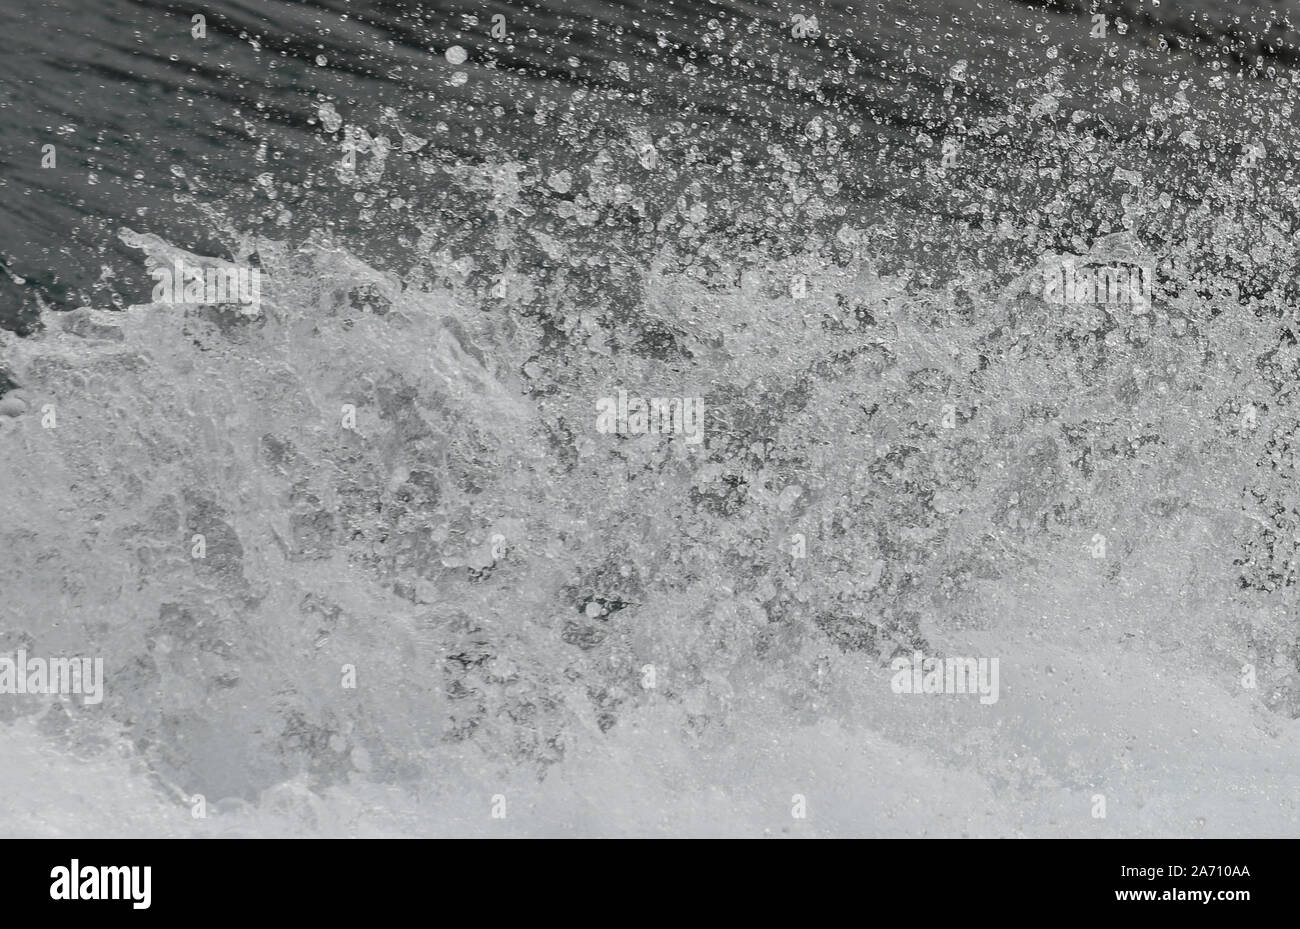 background of a spray of water and water droplets left in the wake of a jet boat Stock Photo